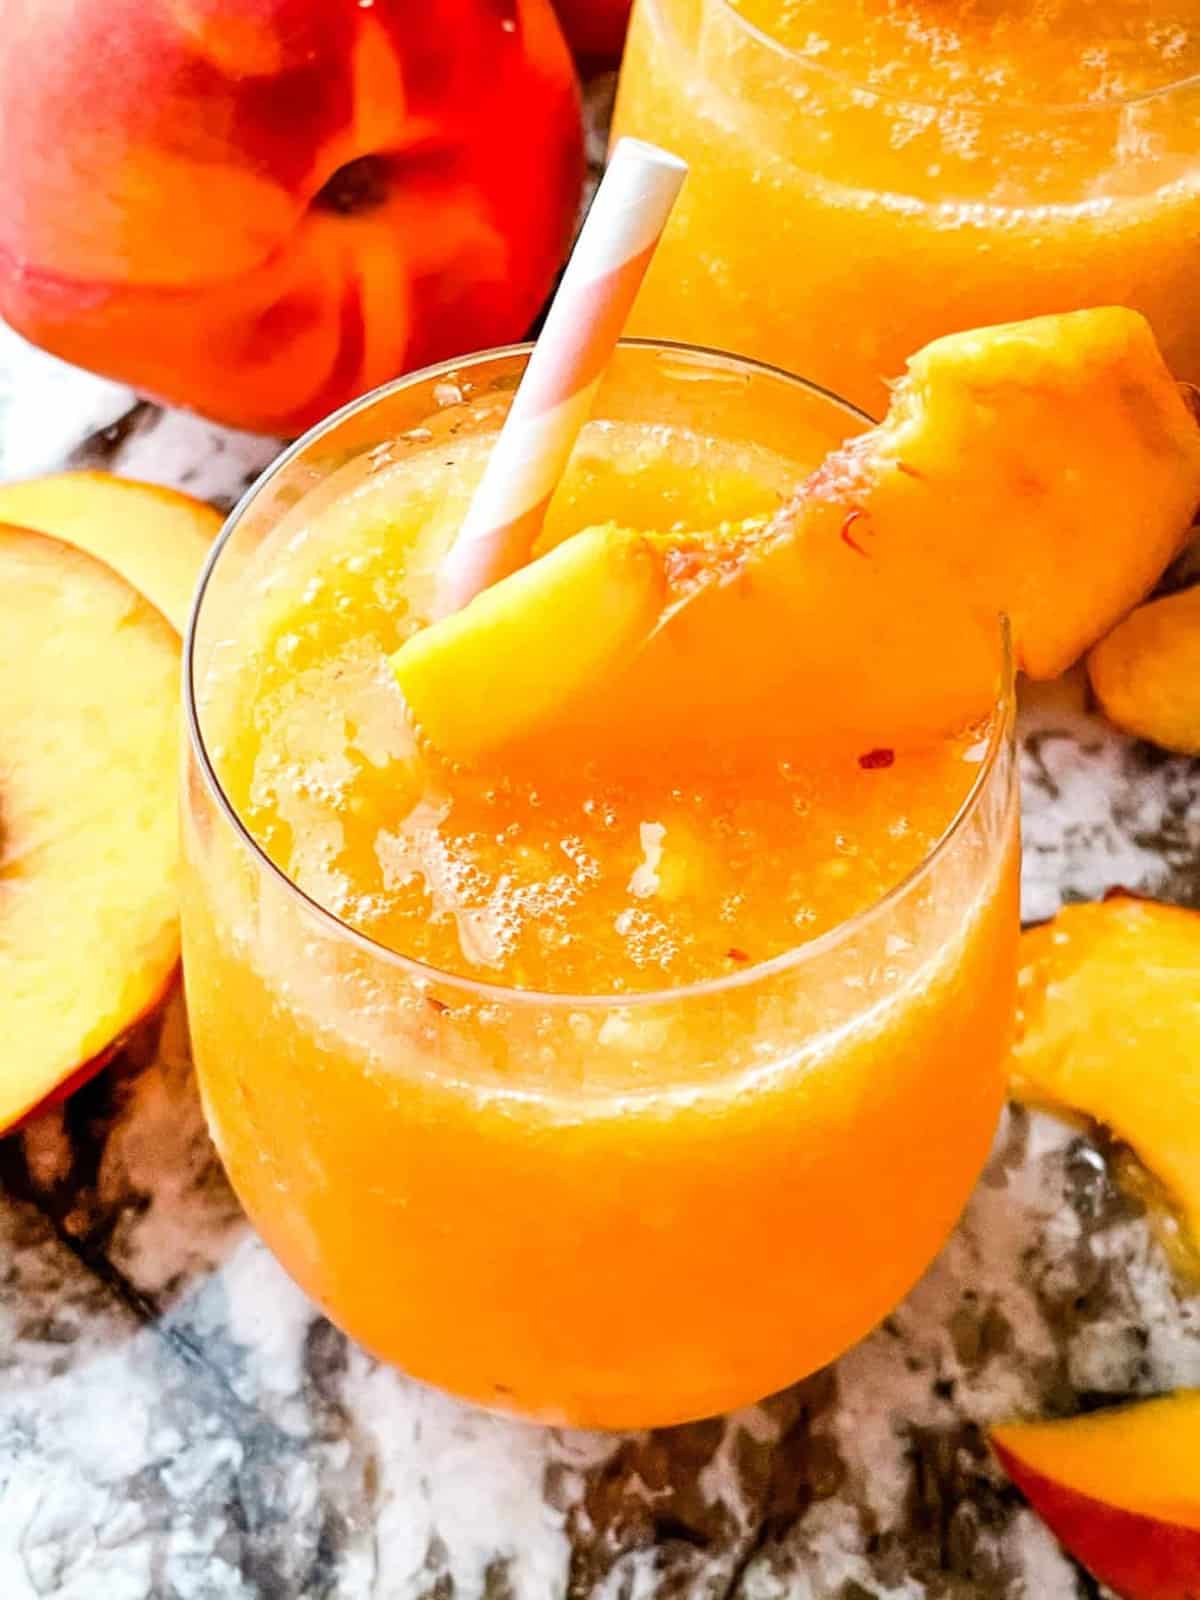 outback steakhouse wallaby darned peach cocktail copycat